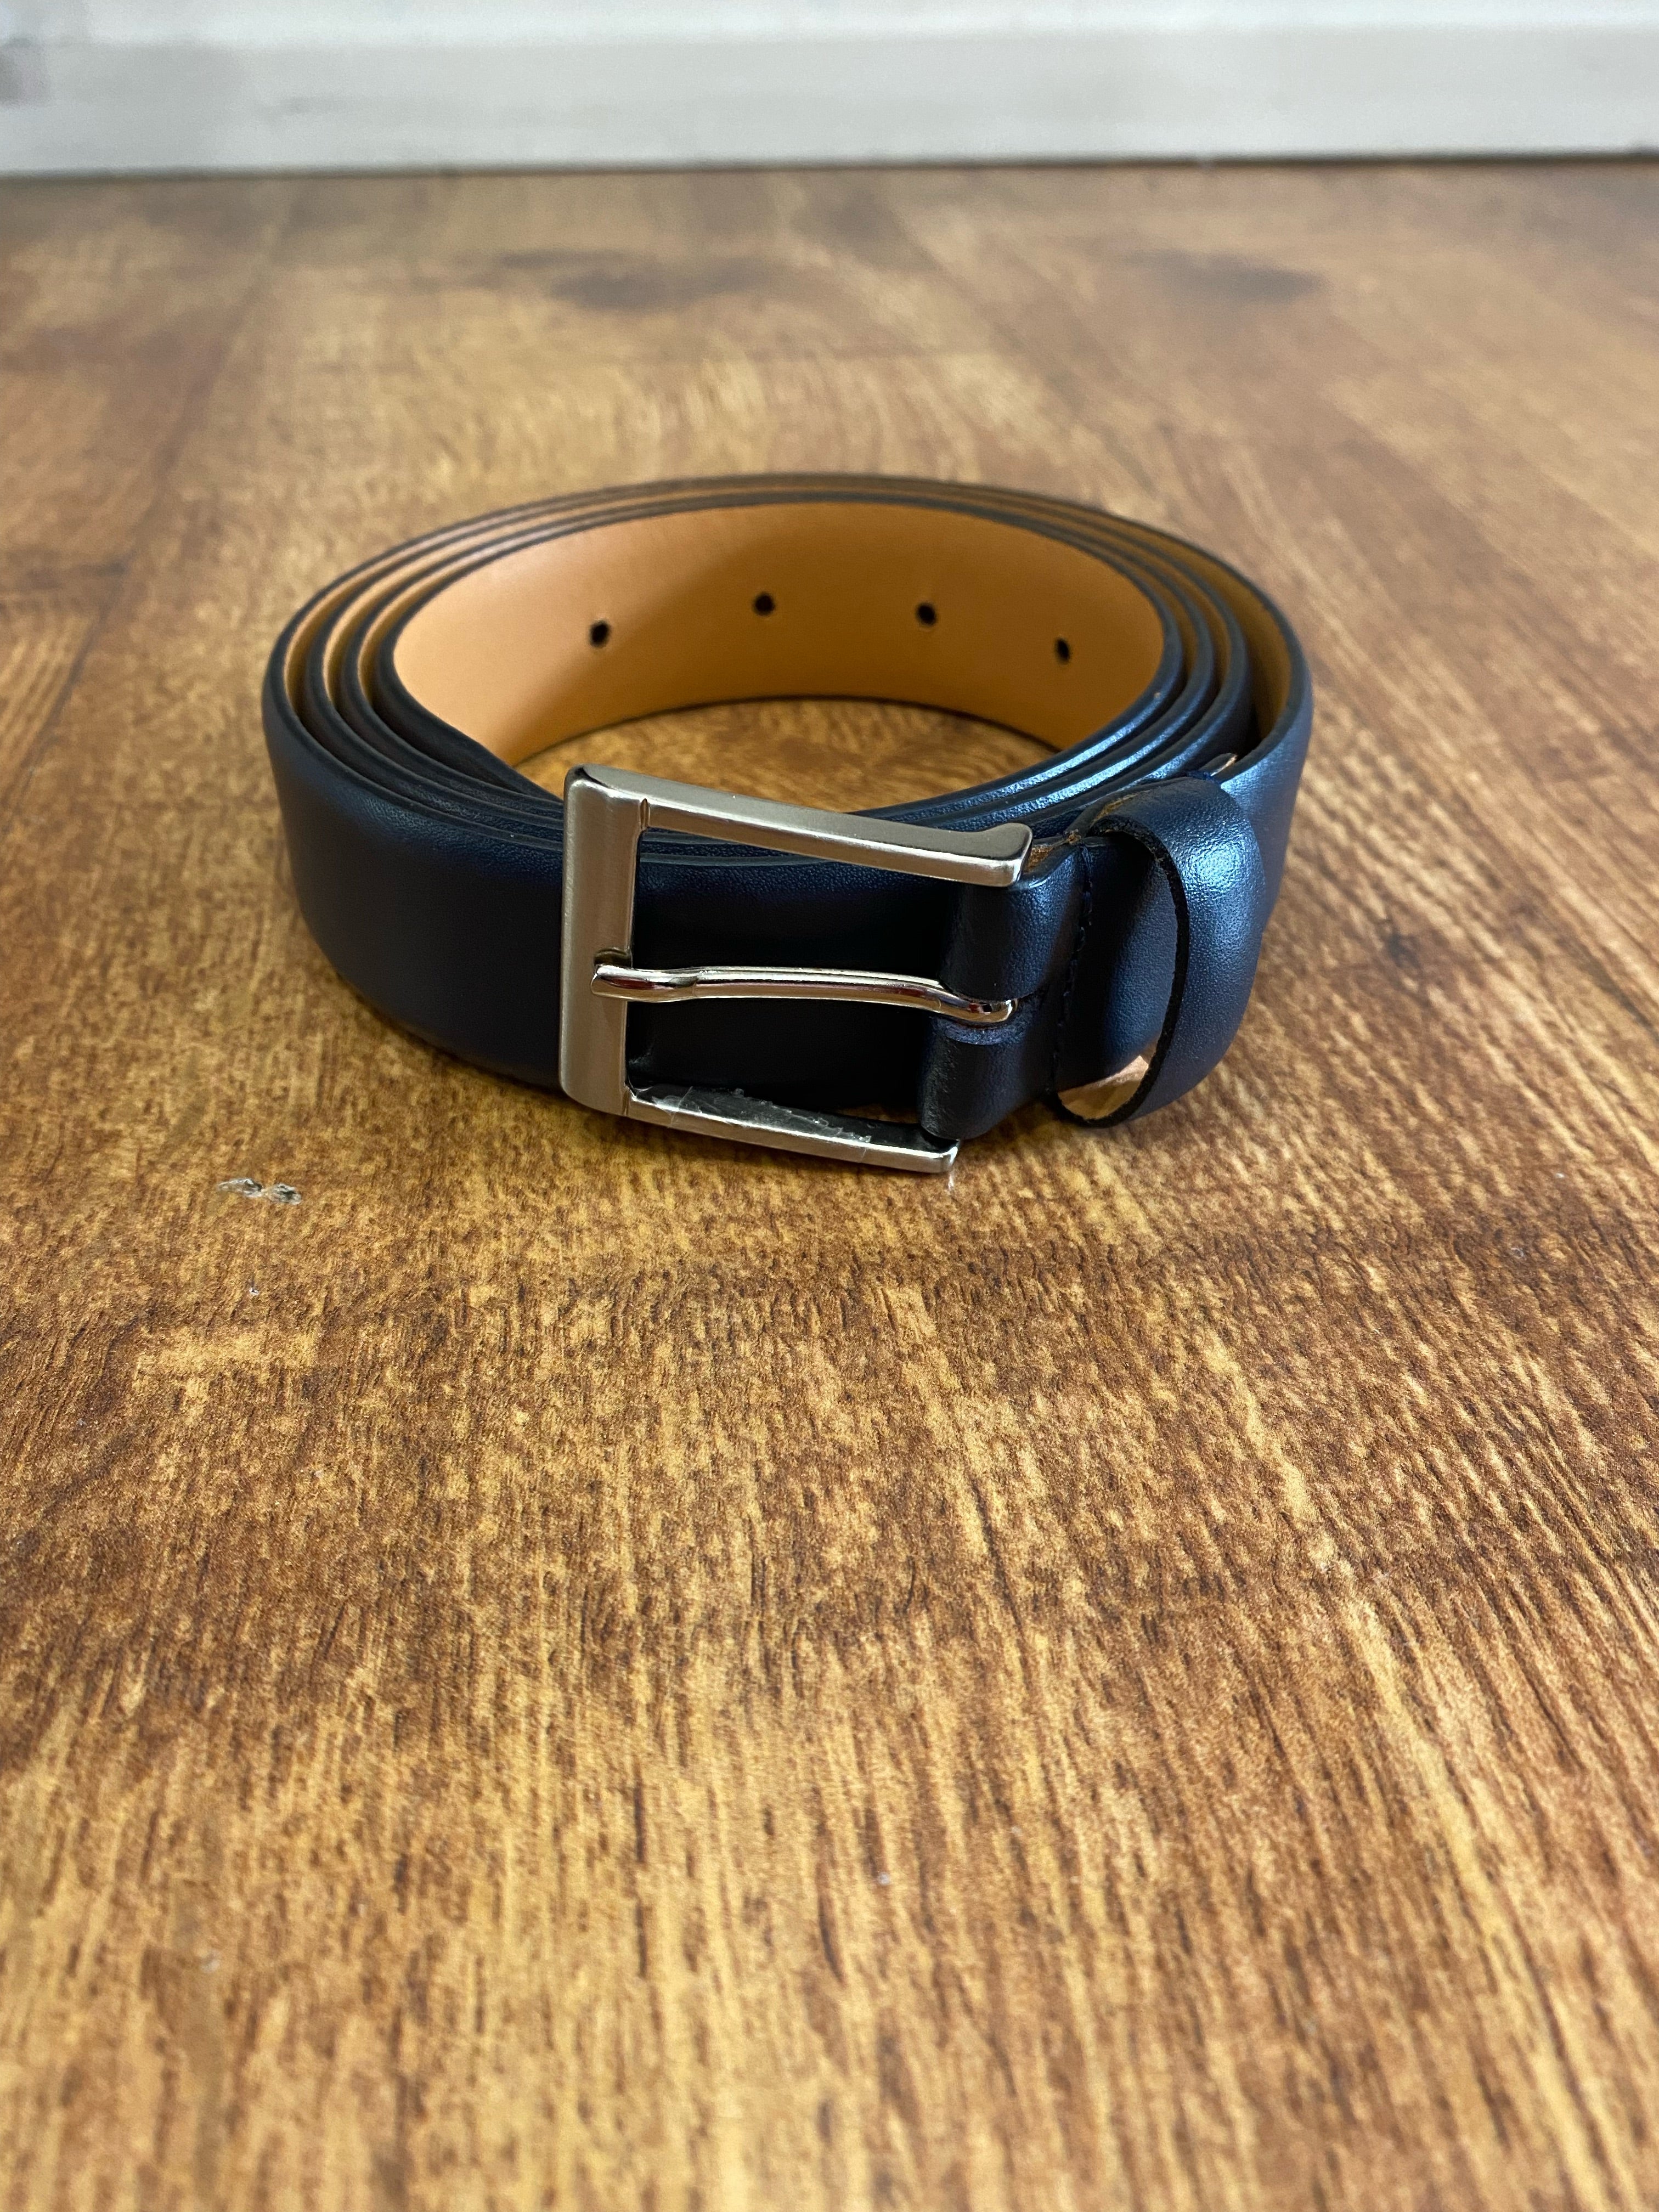 NAVY LEATHER BELT FROM OXFORD LEATHER CRAFT